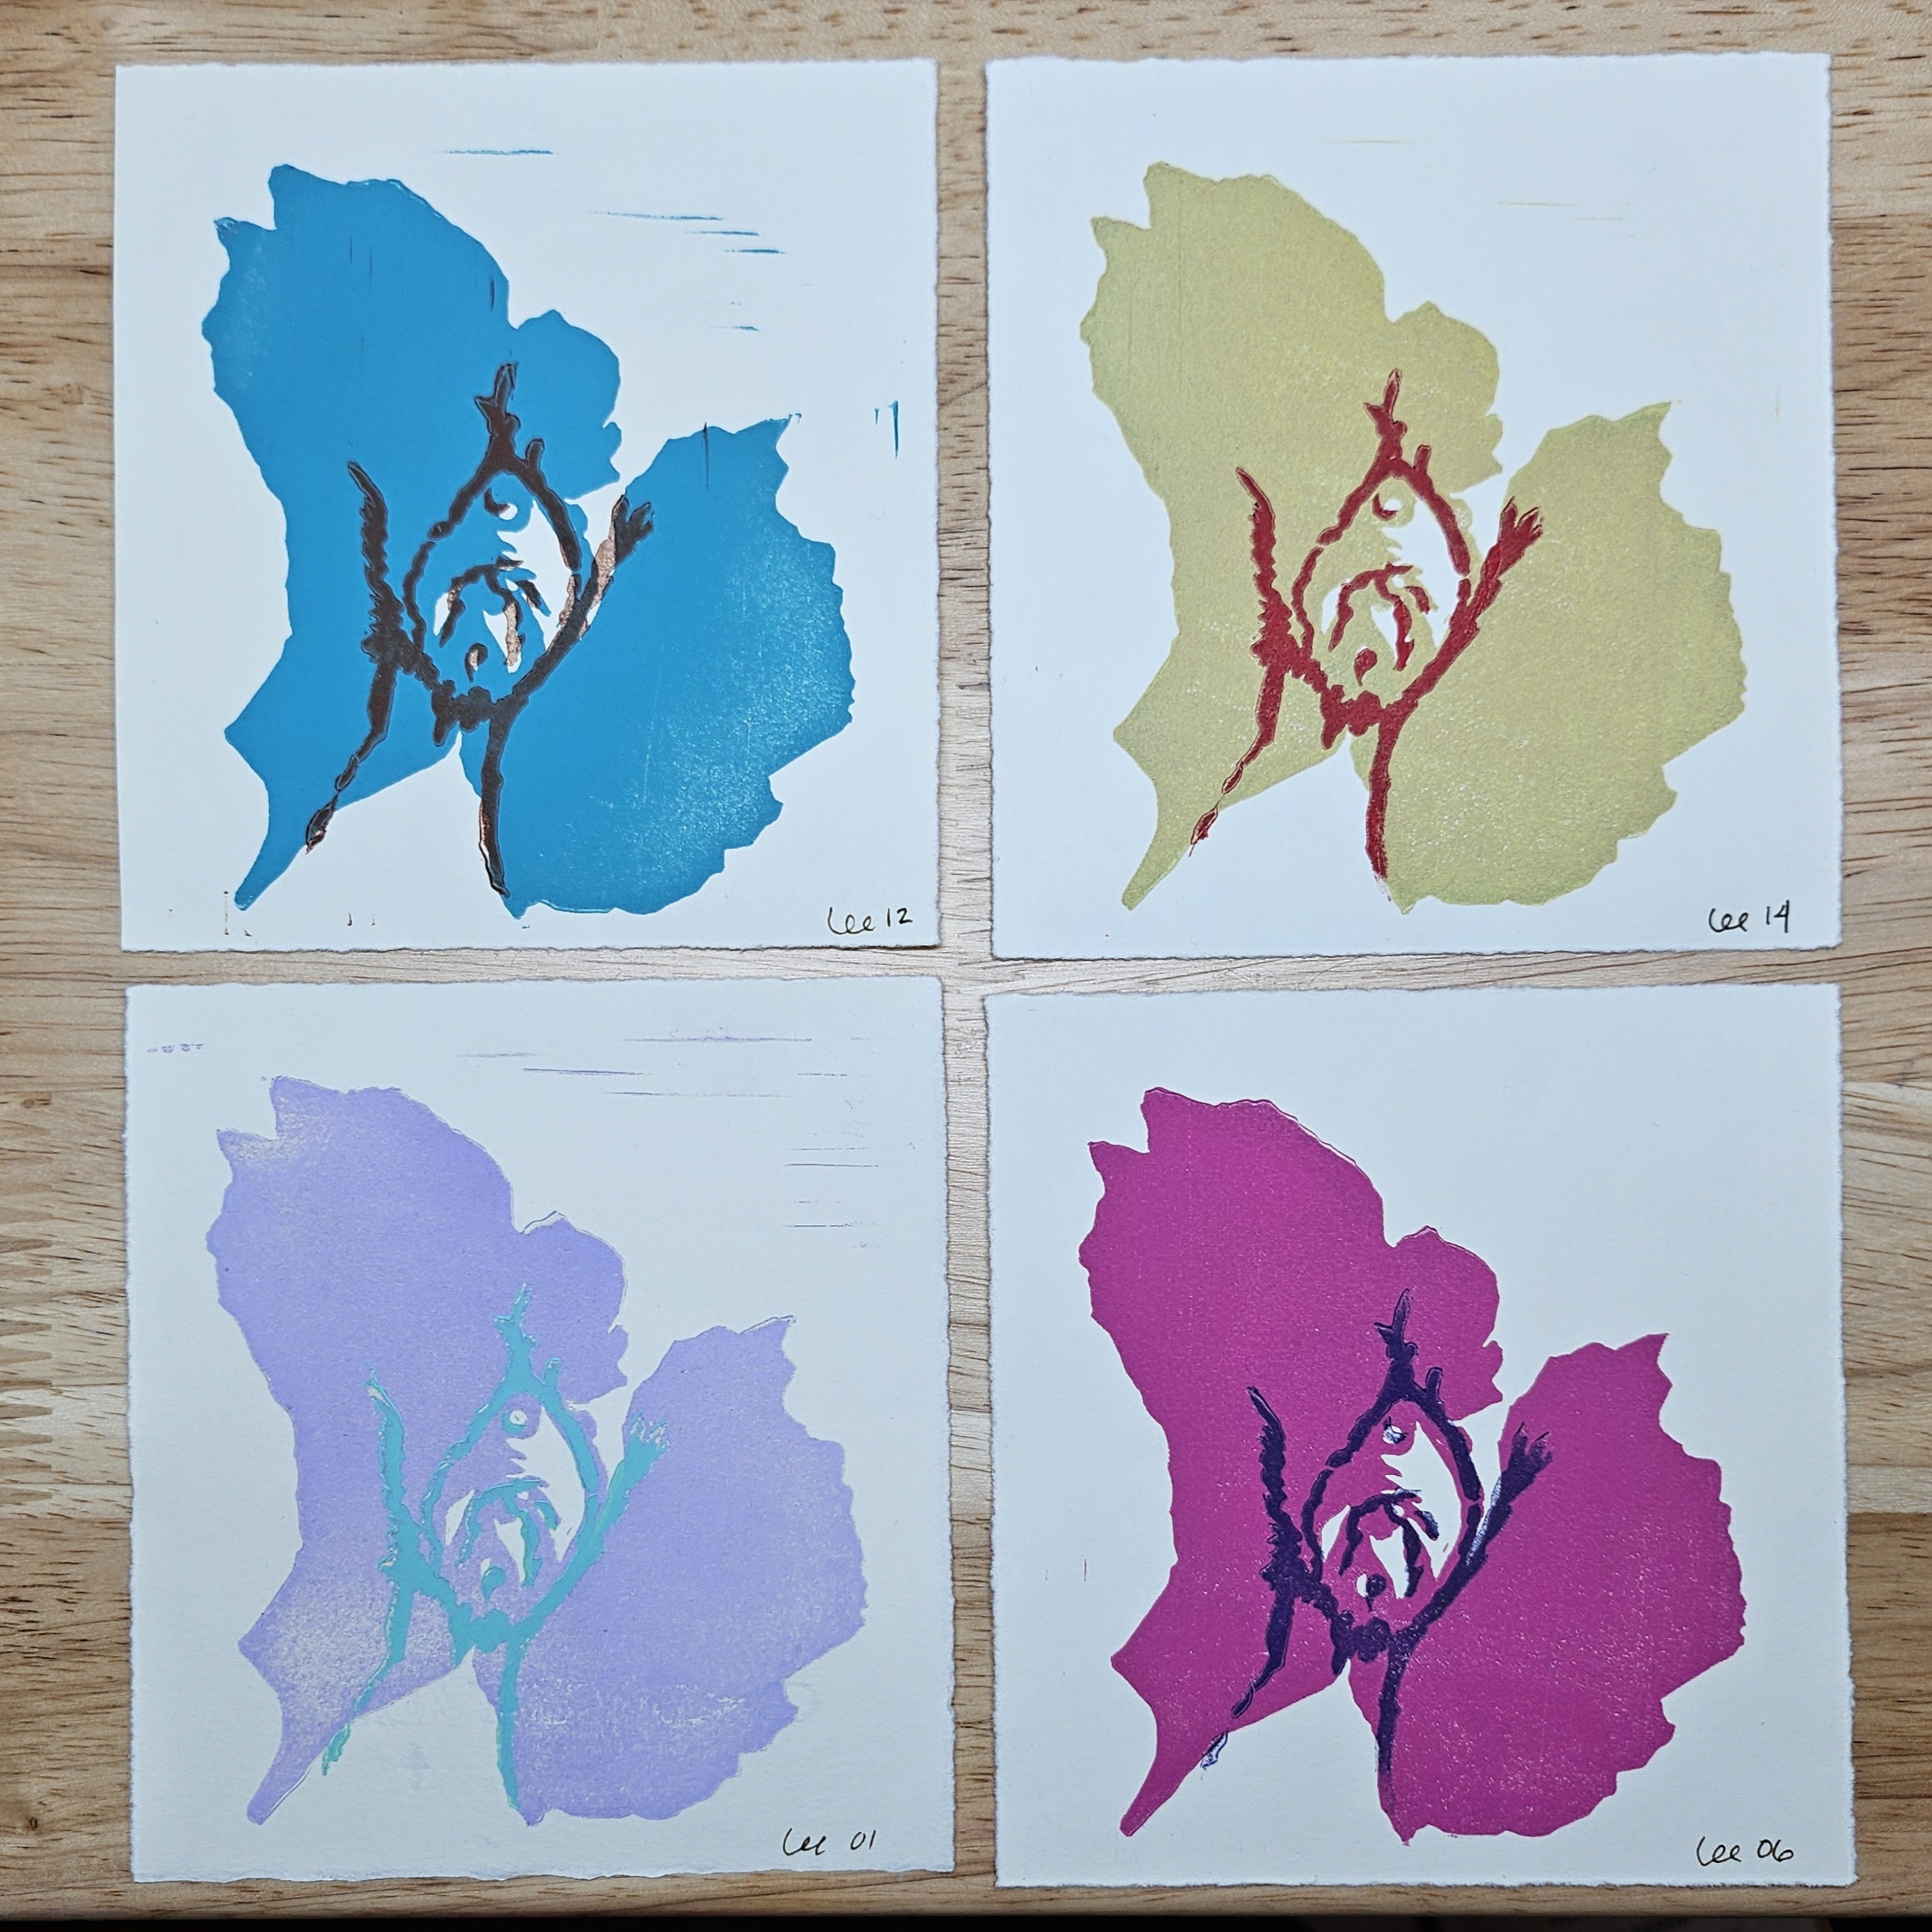 4 copies of the same print in various color schemes, laid out in a 2x2 grid. The print shows testosterone-driven bottom growth of a clitoris. The color schemes are, clockwise from top right, brown on turquoise, red on cornsilk (muted yellow), violet on magenta, and mint green on lilac.